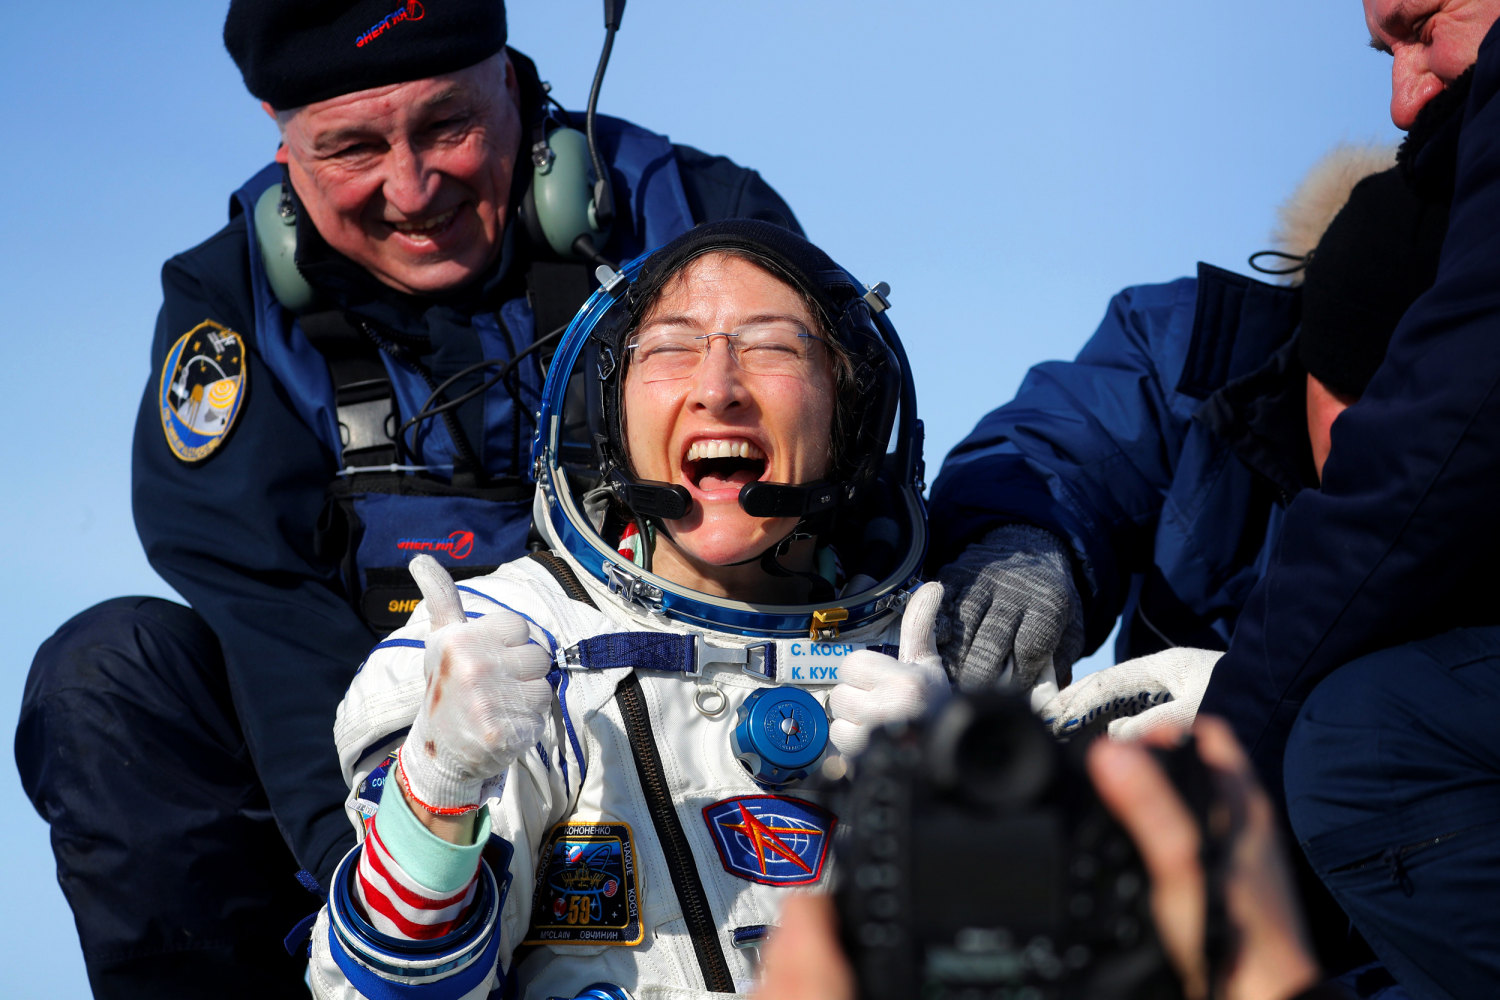 Record-Setting NASA Astronaut, Crewmates Return from Space Mission - NASA